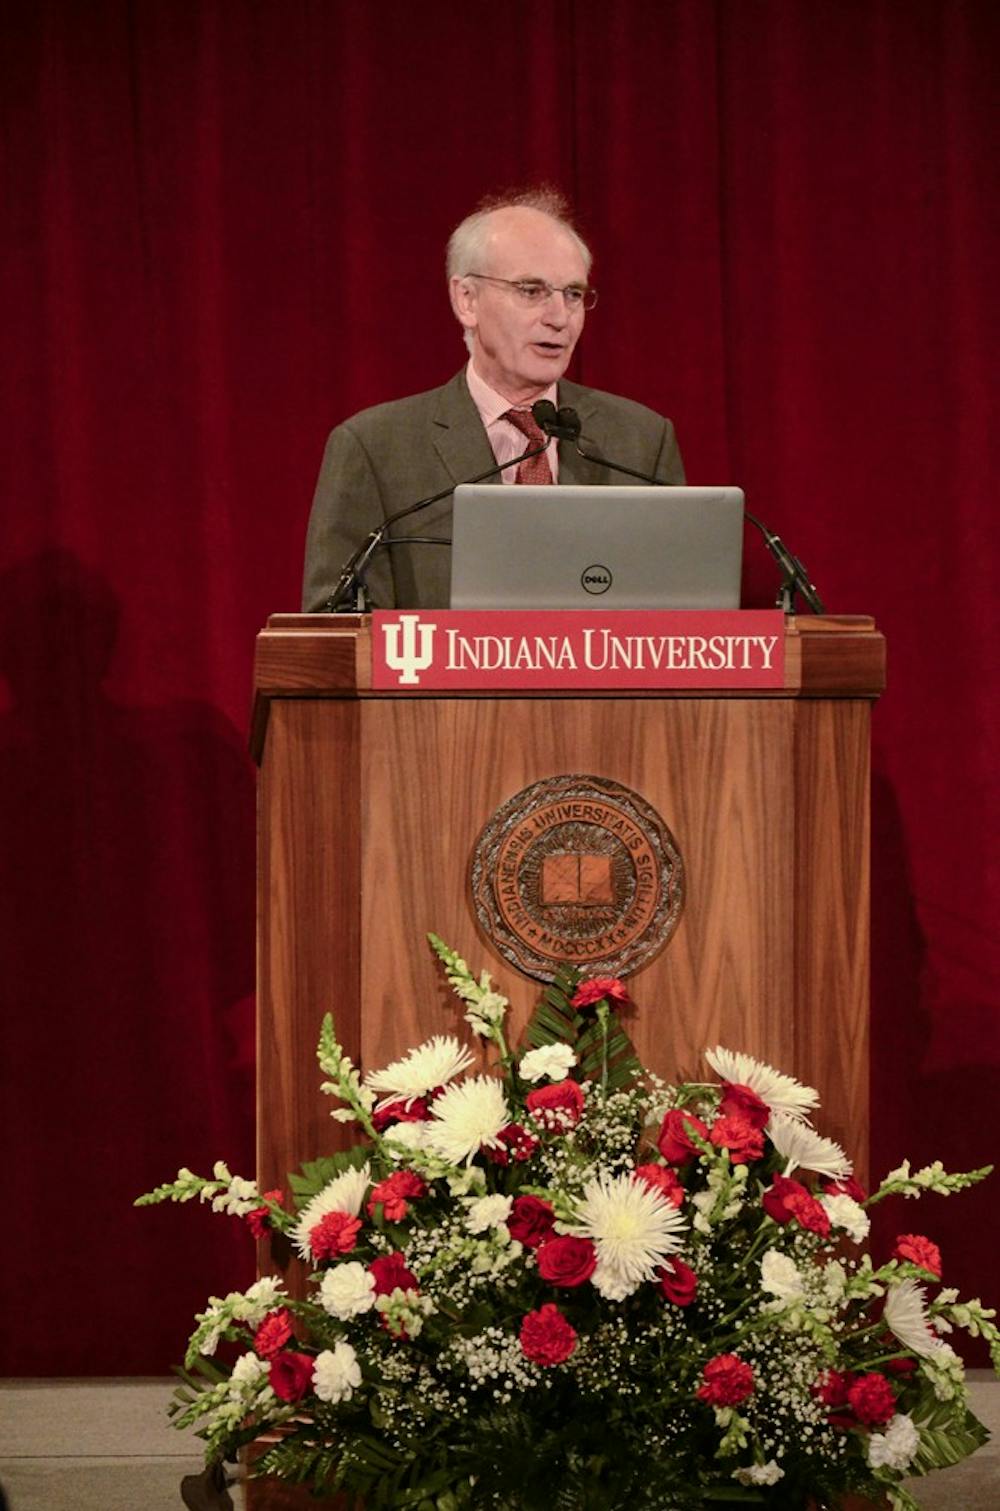 Sir Hew Strachan, Professor of International Relations from University of St. Andrews, delivers the fourth annual Indiana University Patrick O'Meara International Lecture titled "The Centenary of the First World War: Commemoration or Celebration" in Indiana Memorial Union Alumni Hall on Wednesday.